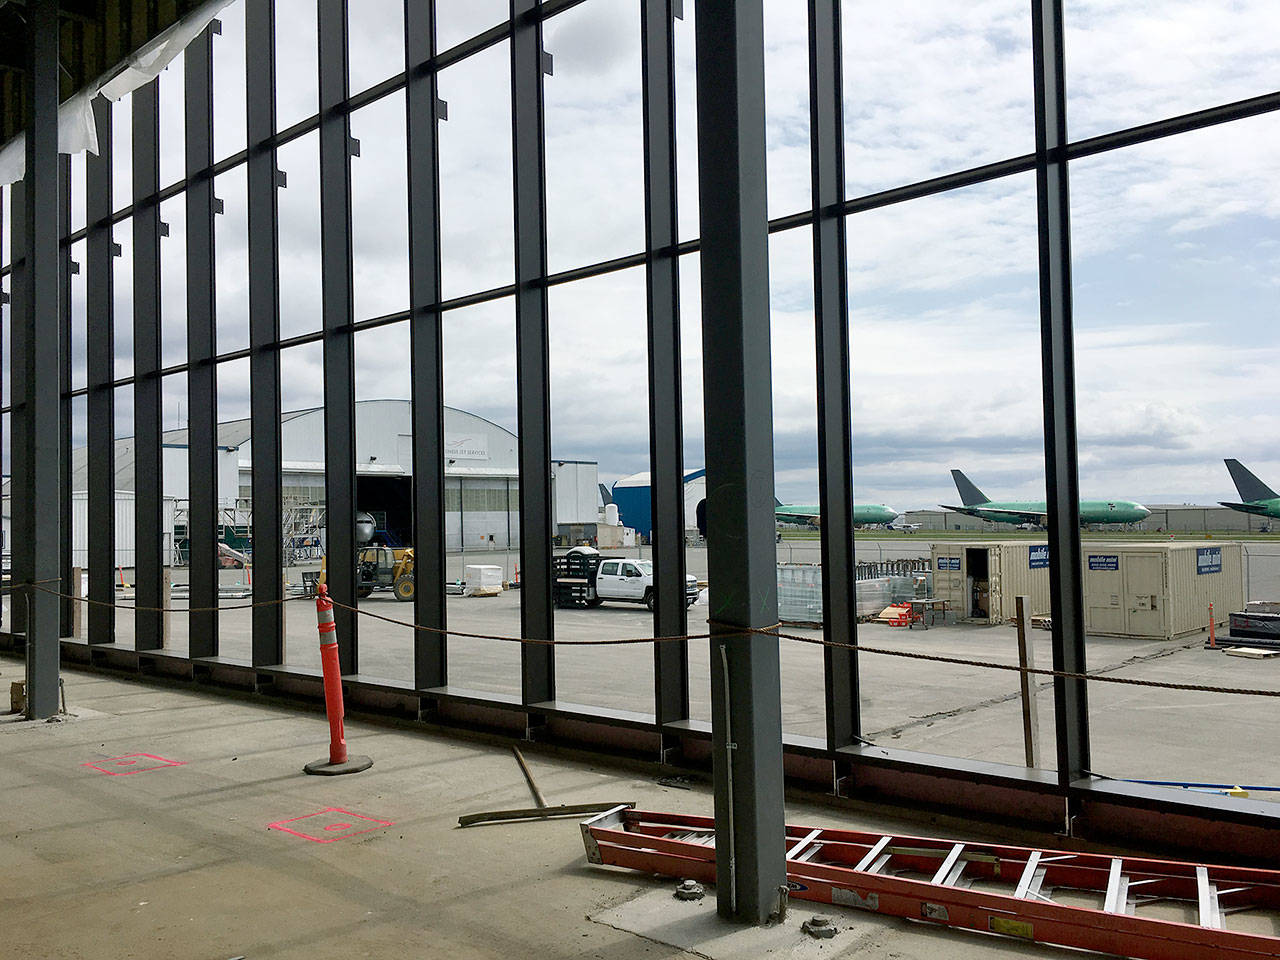 The passenger terminal at Paine Field in Everett features large windows. (Janice Podsada / The Herald)